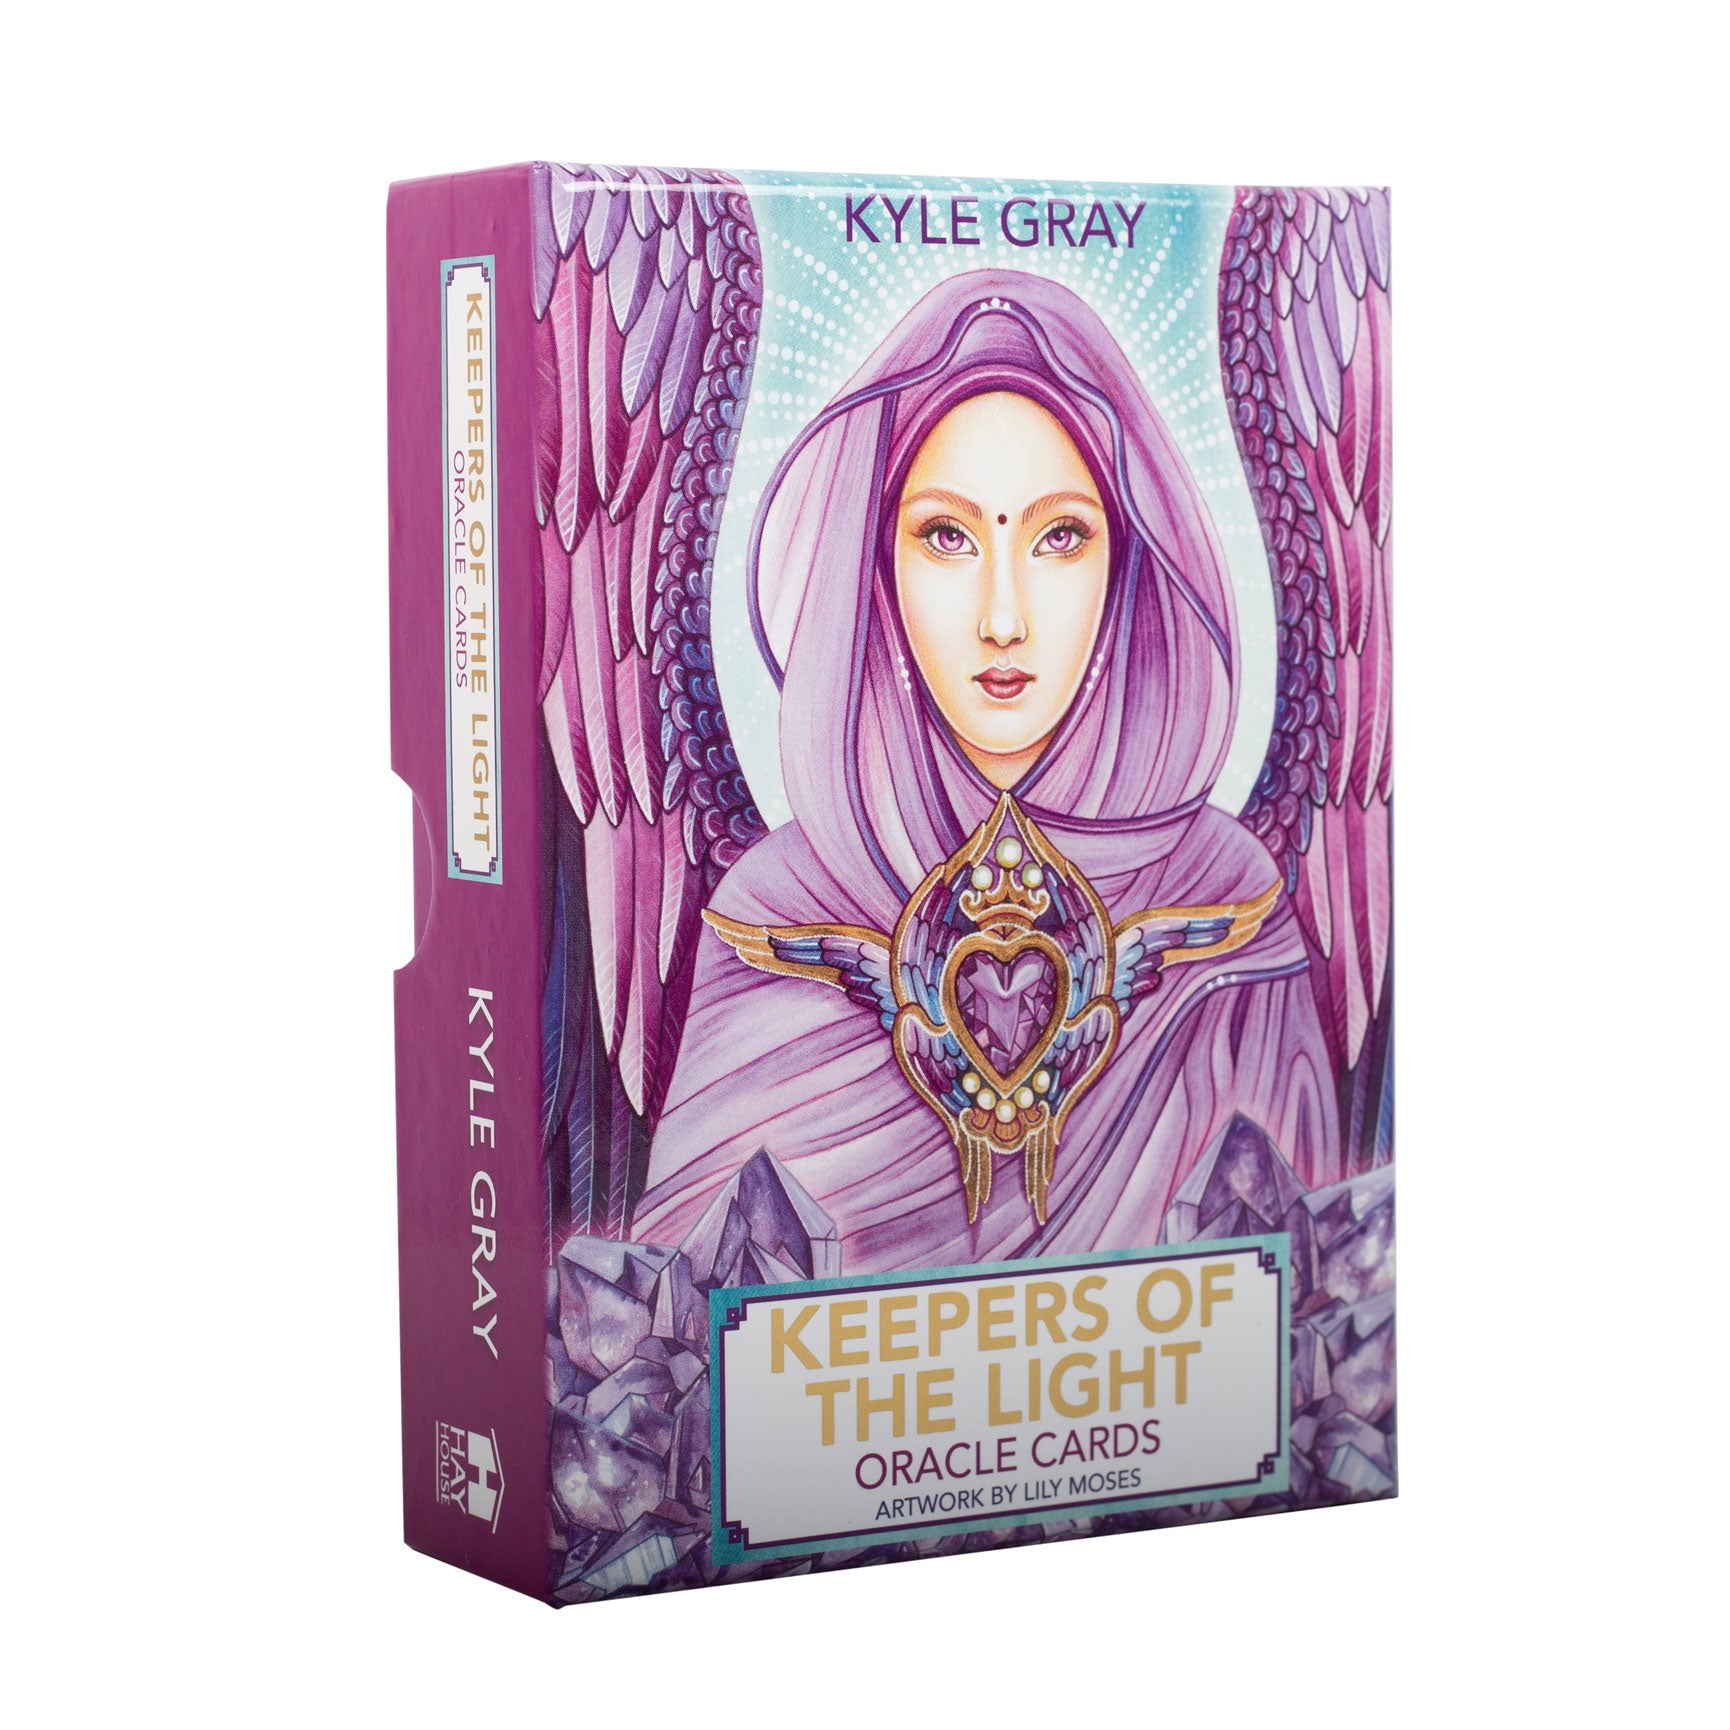 View Keepers of the Light Oracle Cards information